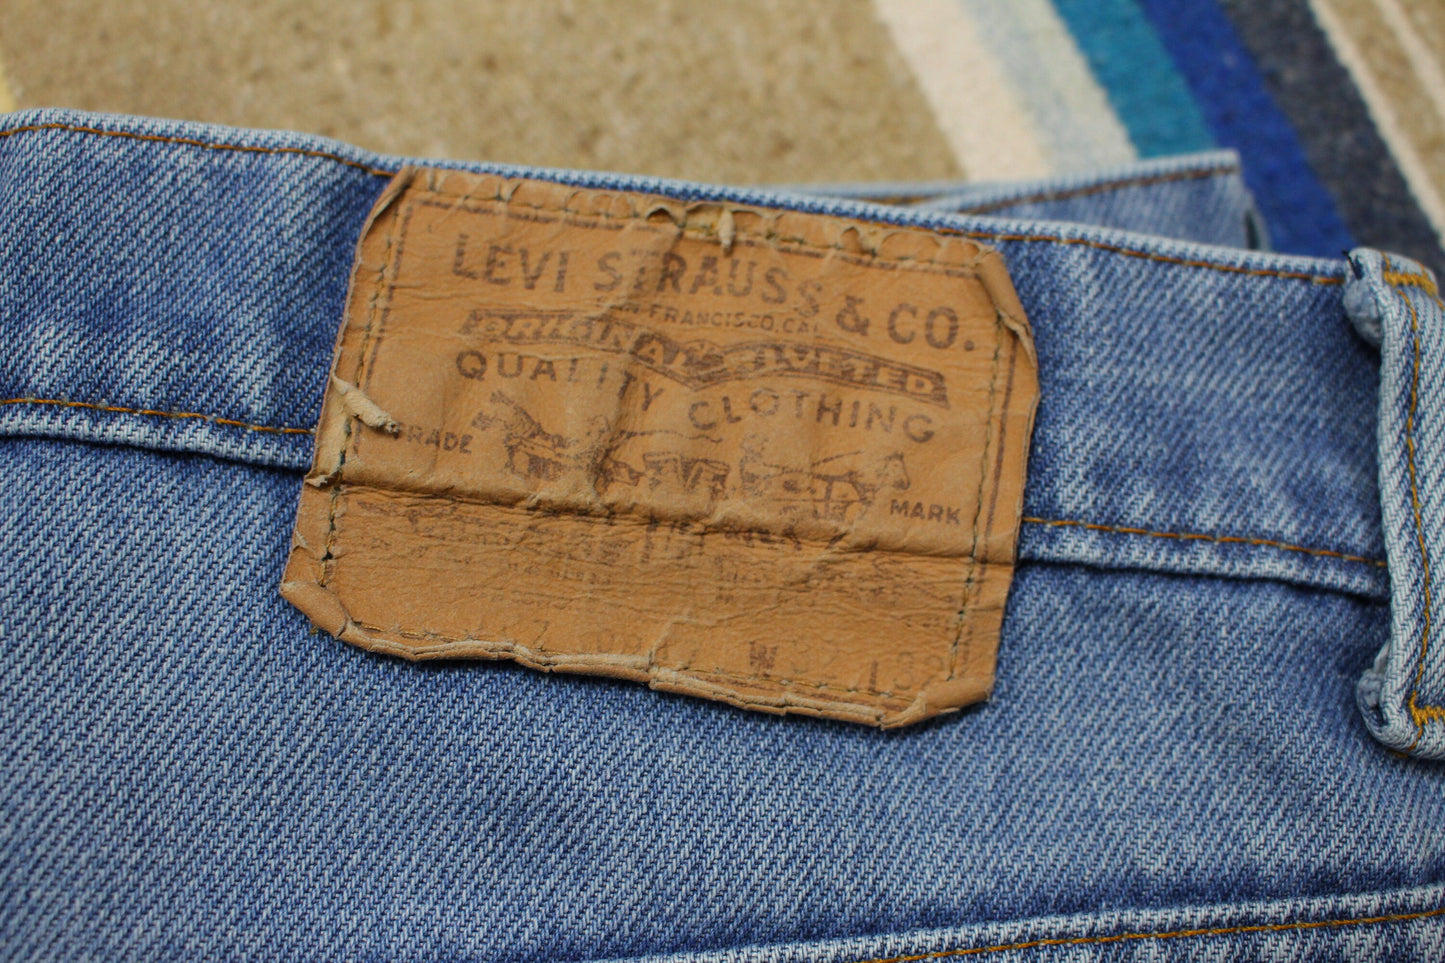 1970s Levi's Orange Tab 517 Faded Blue Denim Jeans Made in USA Size 31x31